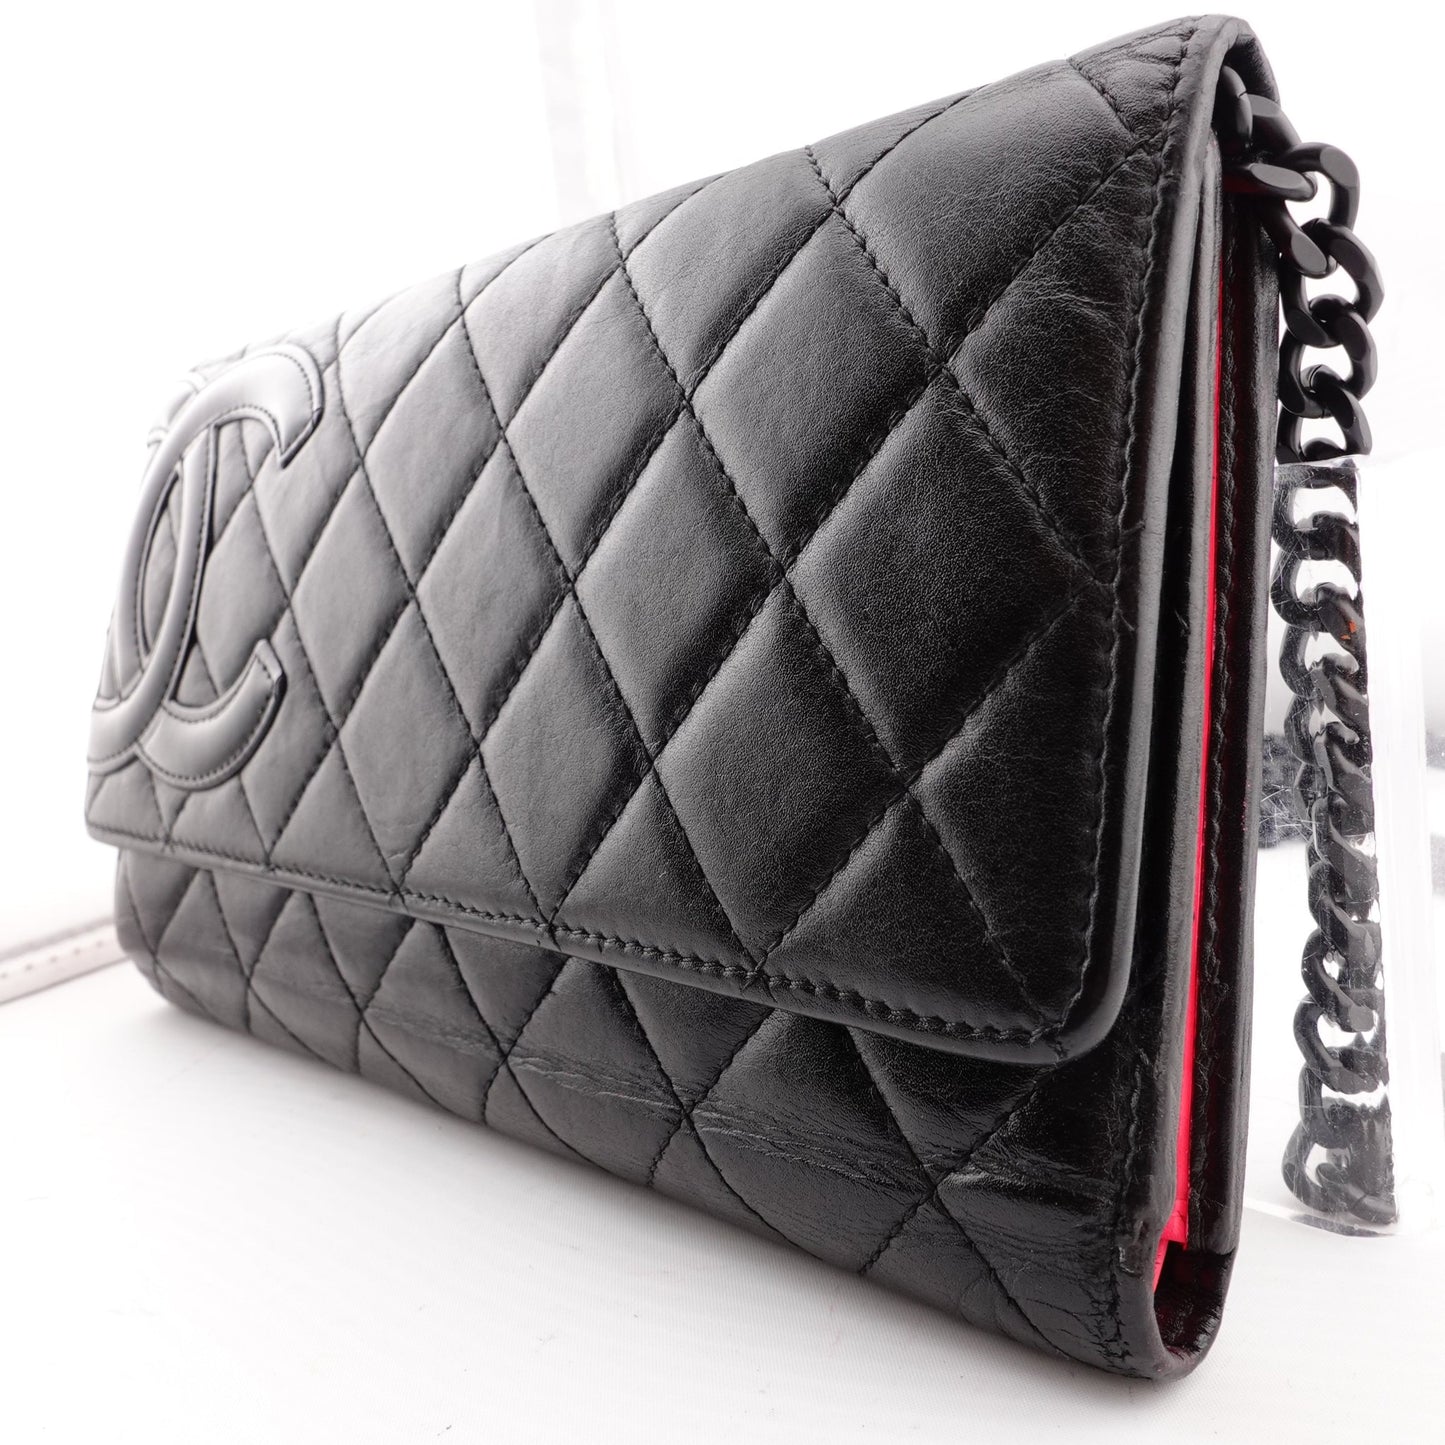 CHANEL Lambskin Cambon Trifold Wallet with Chain - Bag Envy